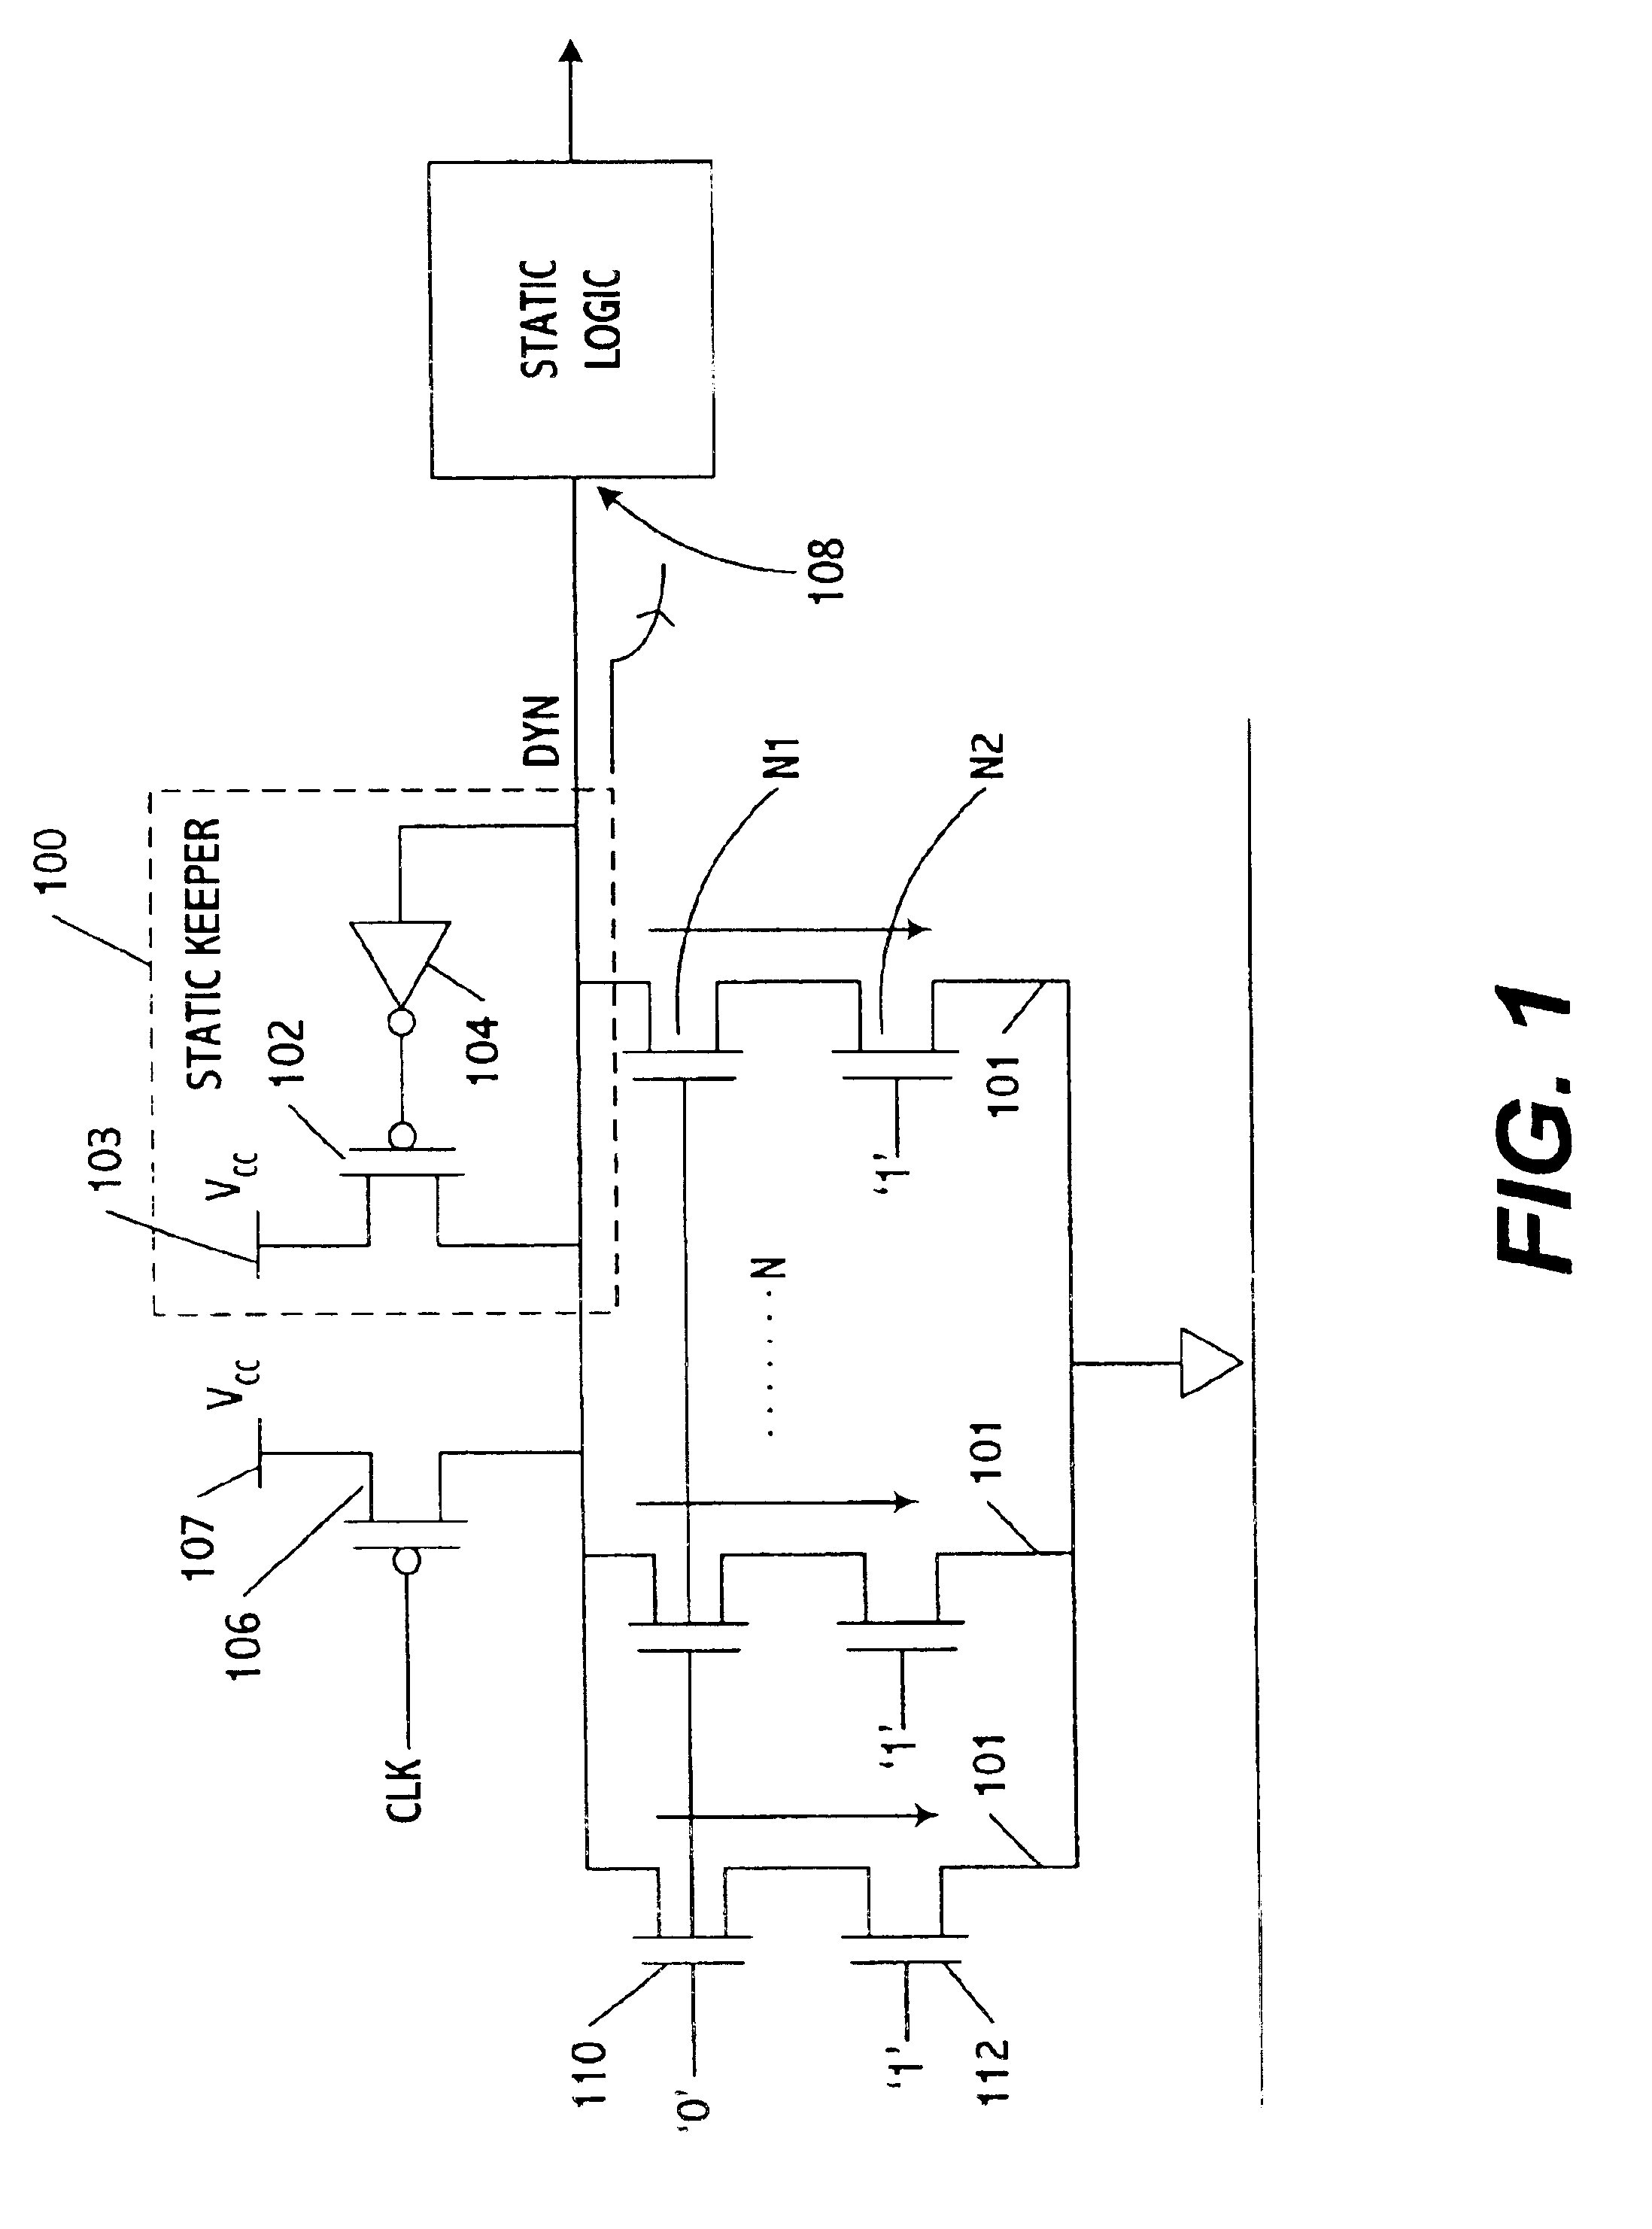 Current mirror based multi-channel leakage current monitor circuit and method